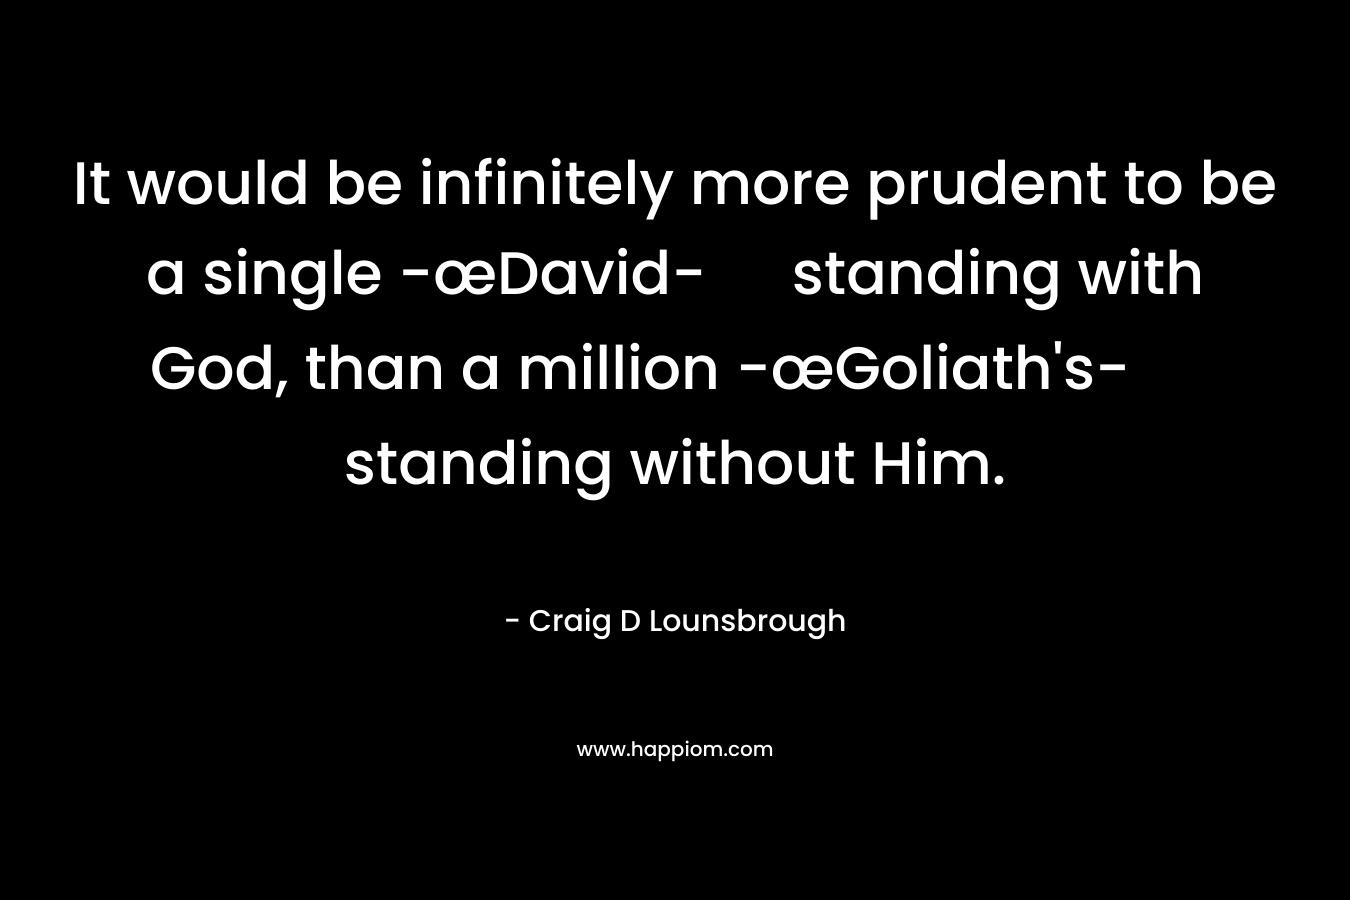 It would be infinitely more prudent to be a single -œDavid- standing with God, than a million -œGoliath's- standing without Him.